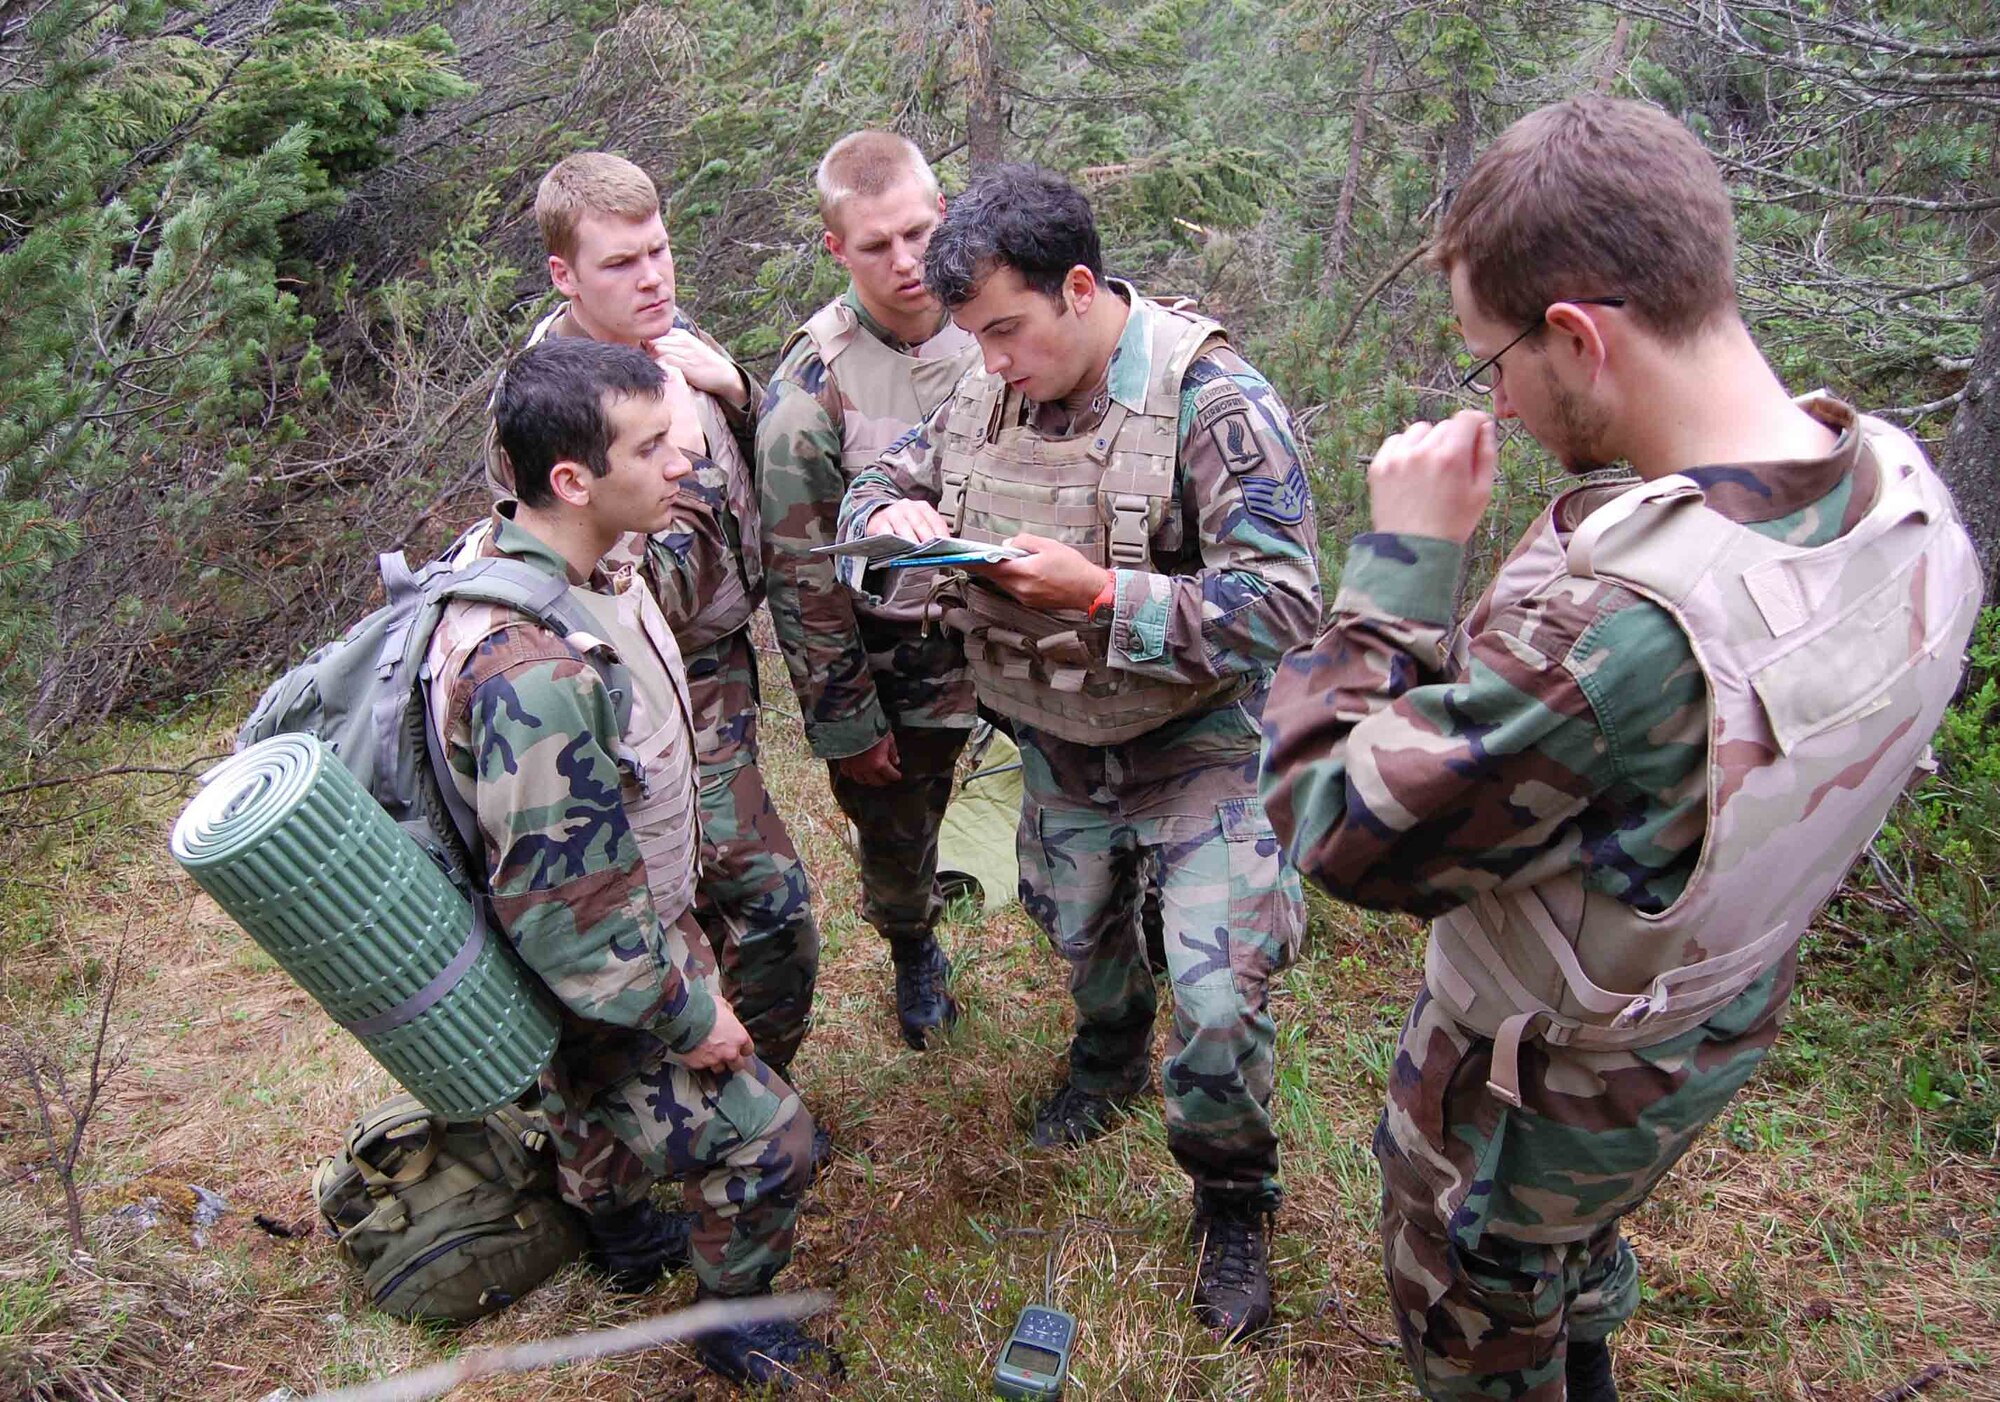 Staff Sgt. Gregory Predmore of the 8th Air Support Operations Squadron instructs Air Force Academy cadets in land navigation as part of an exercise in conjunction with the cadets' Operation Air Force visit to the base June 11. (U.S. Air Force photo/Staff Sgt. Lindsey Maurice)